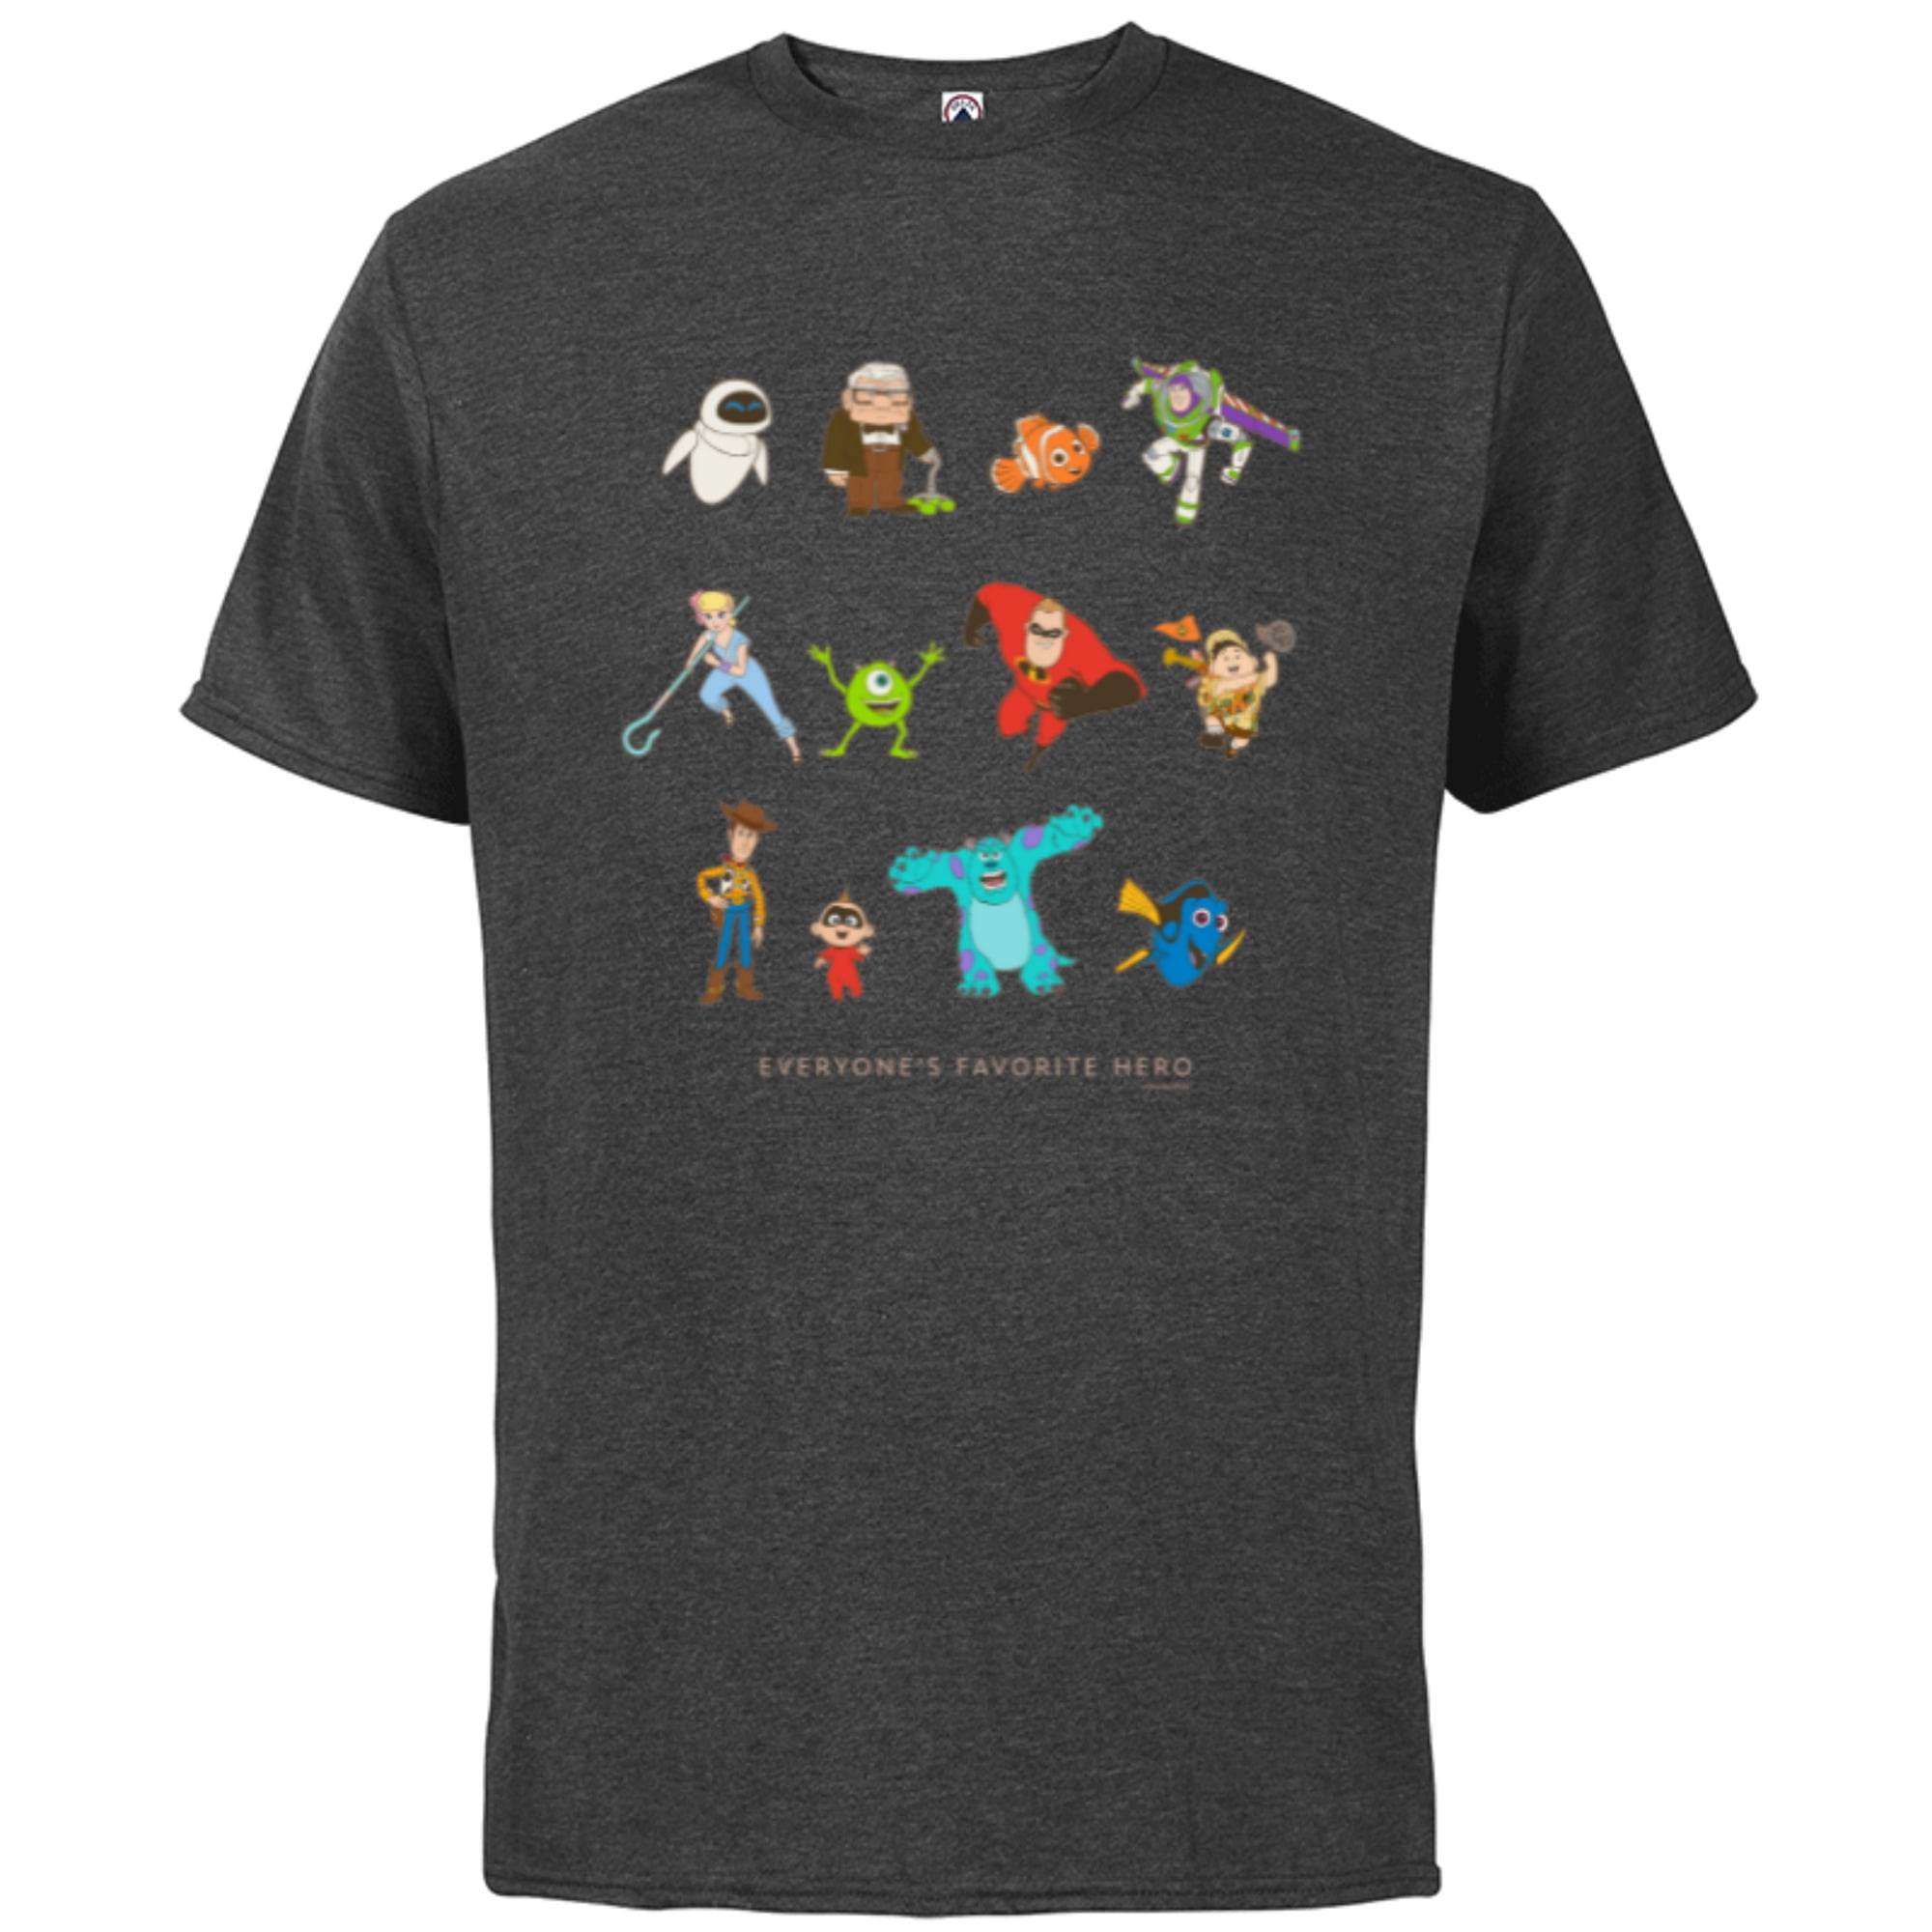 Disney and Pixar Character Everyone’s Favorite Hero - Short Sleeve Cotton  T-Shirt for Adults - Customized-Black